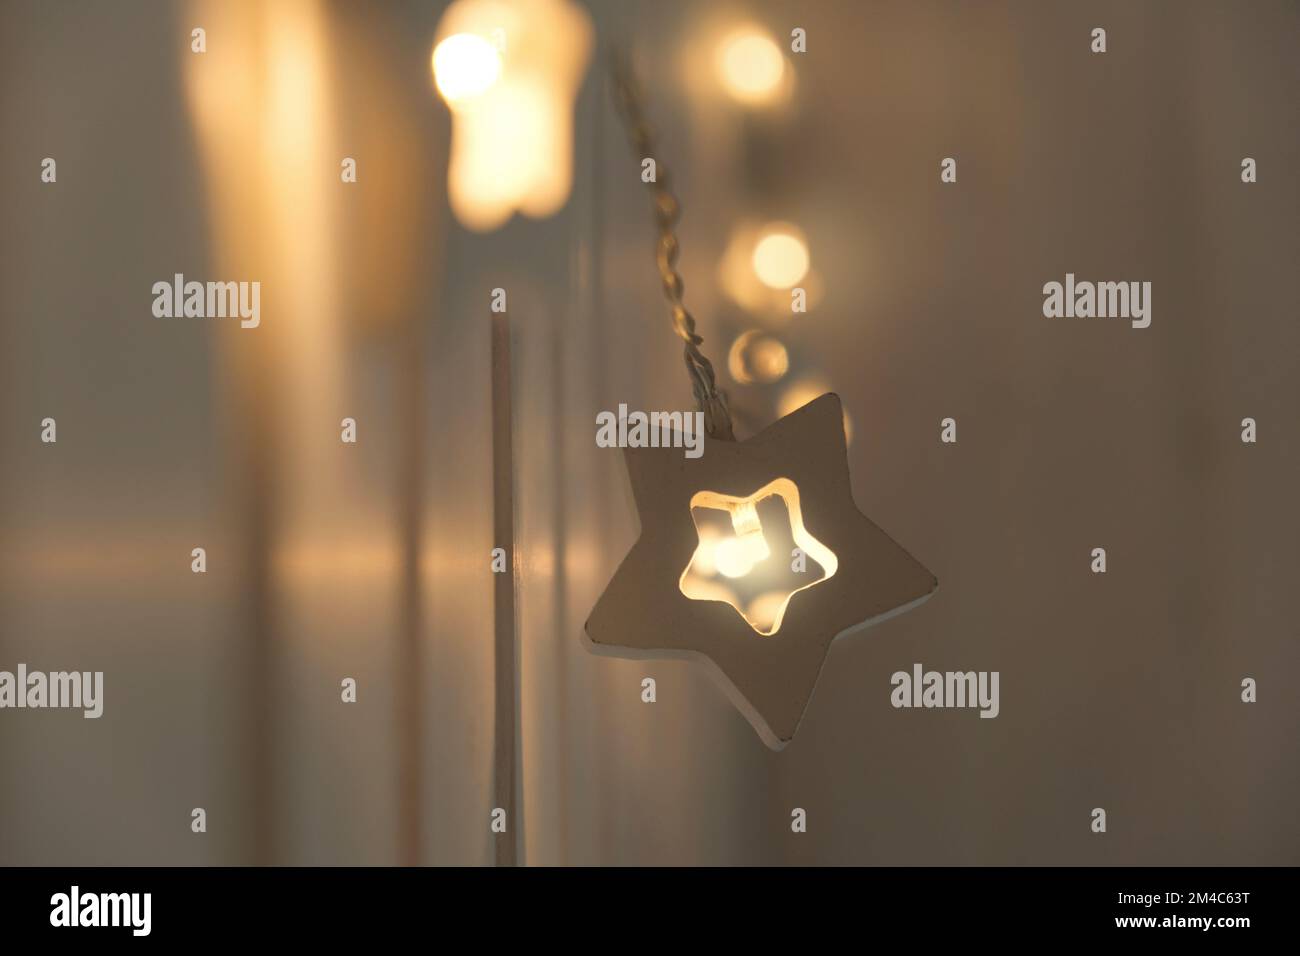 Star Shaped Christmas Lights Garland Hanging on a Wood Wall. Close Up, Selective Focus. Bedroom Interior. Cozy Home Moment. New Year's, Christmas Mood Stock Photo